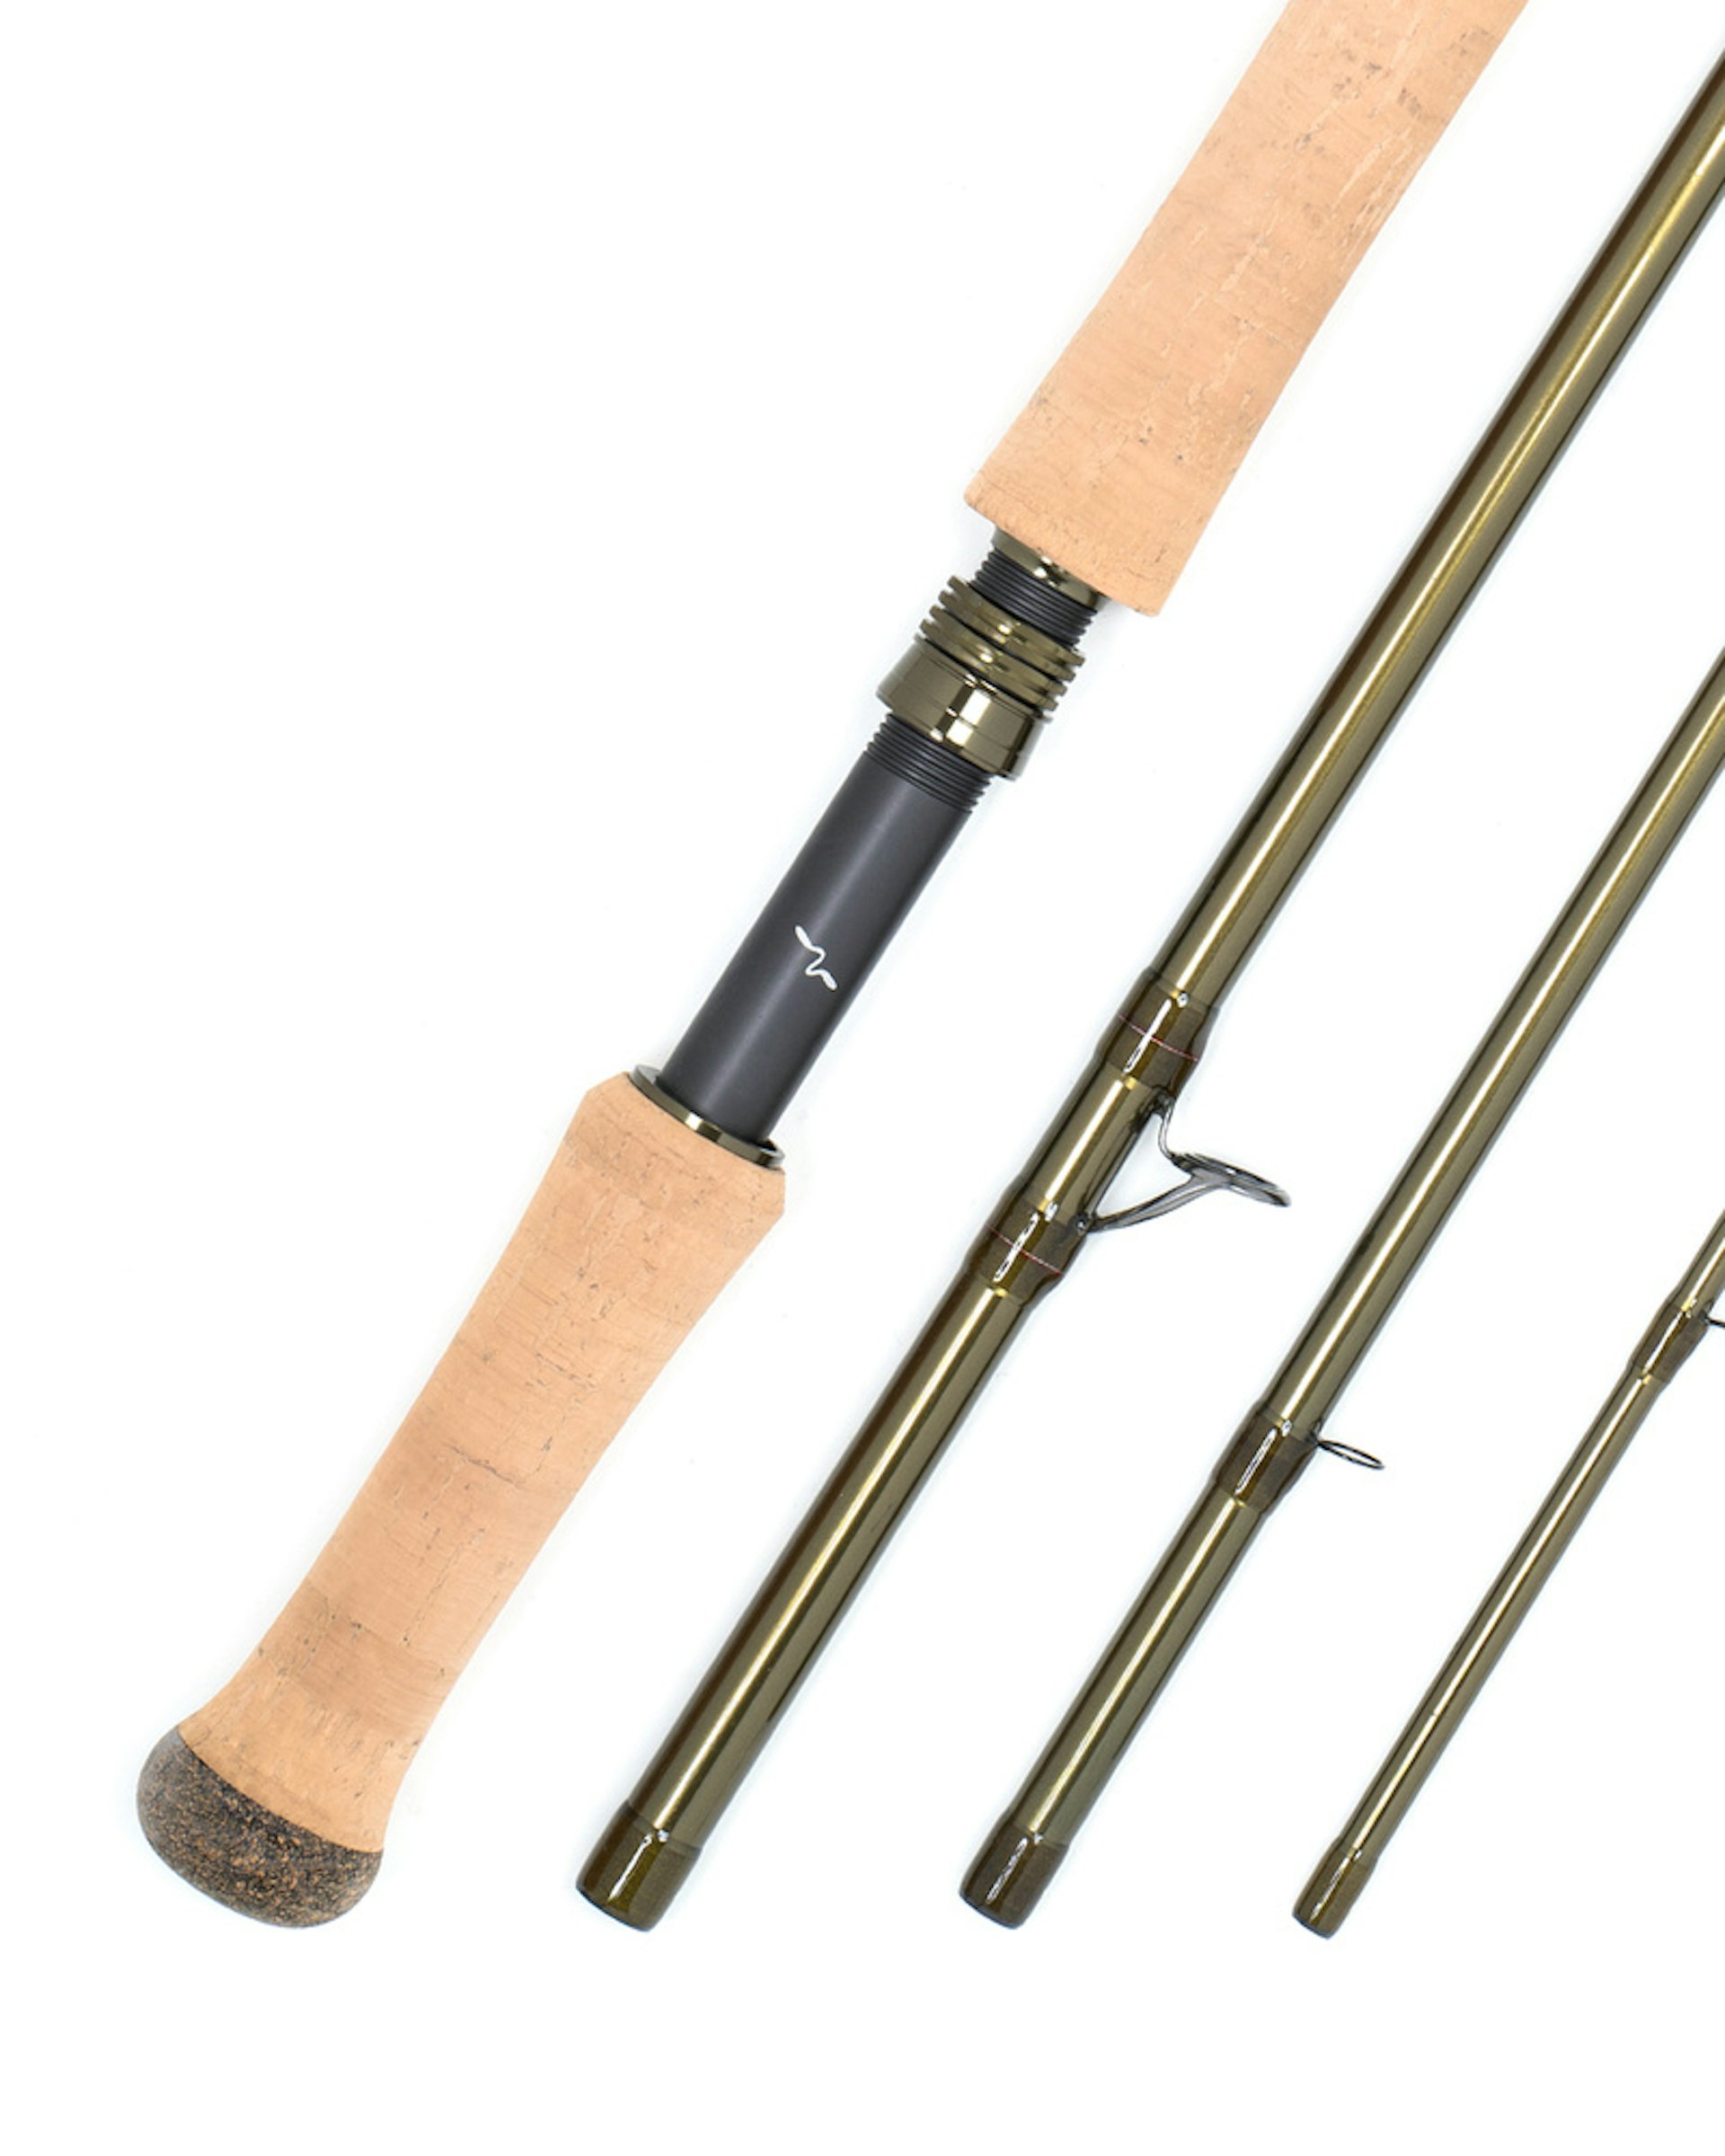 B Blesiya Fly Rod Cork Handle Lightweight Fishing Rod Handle Grip Kit for  Rod Building or Repair, Easy to Install